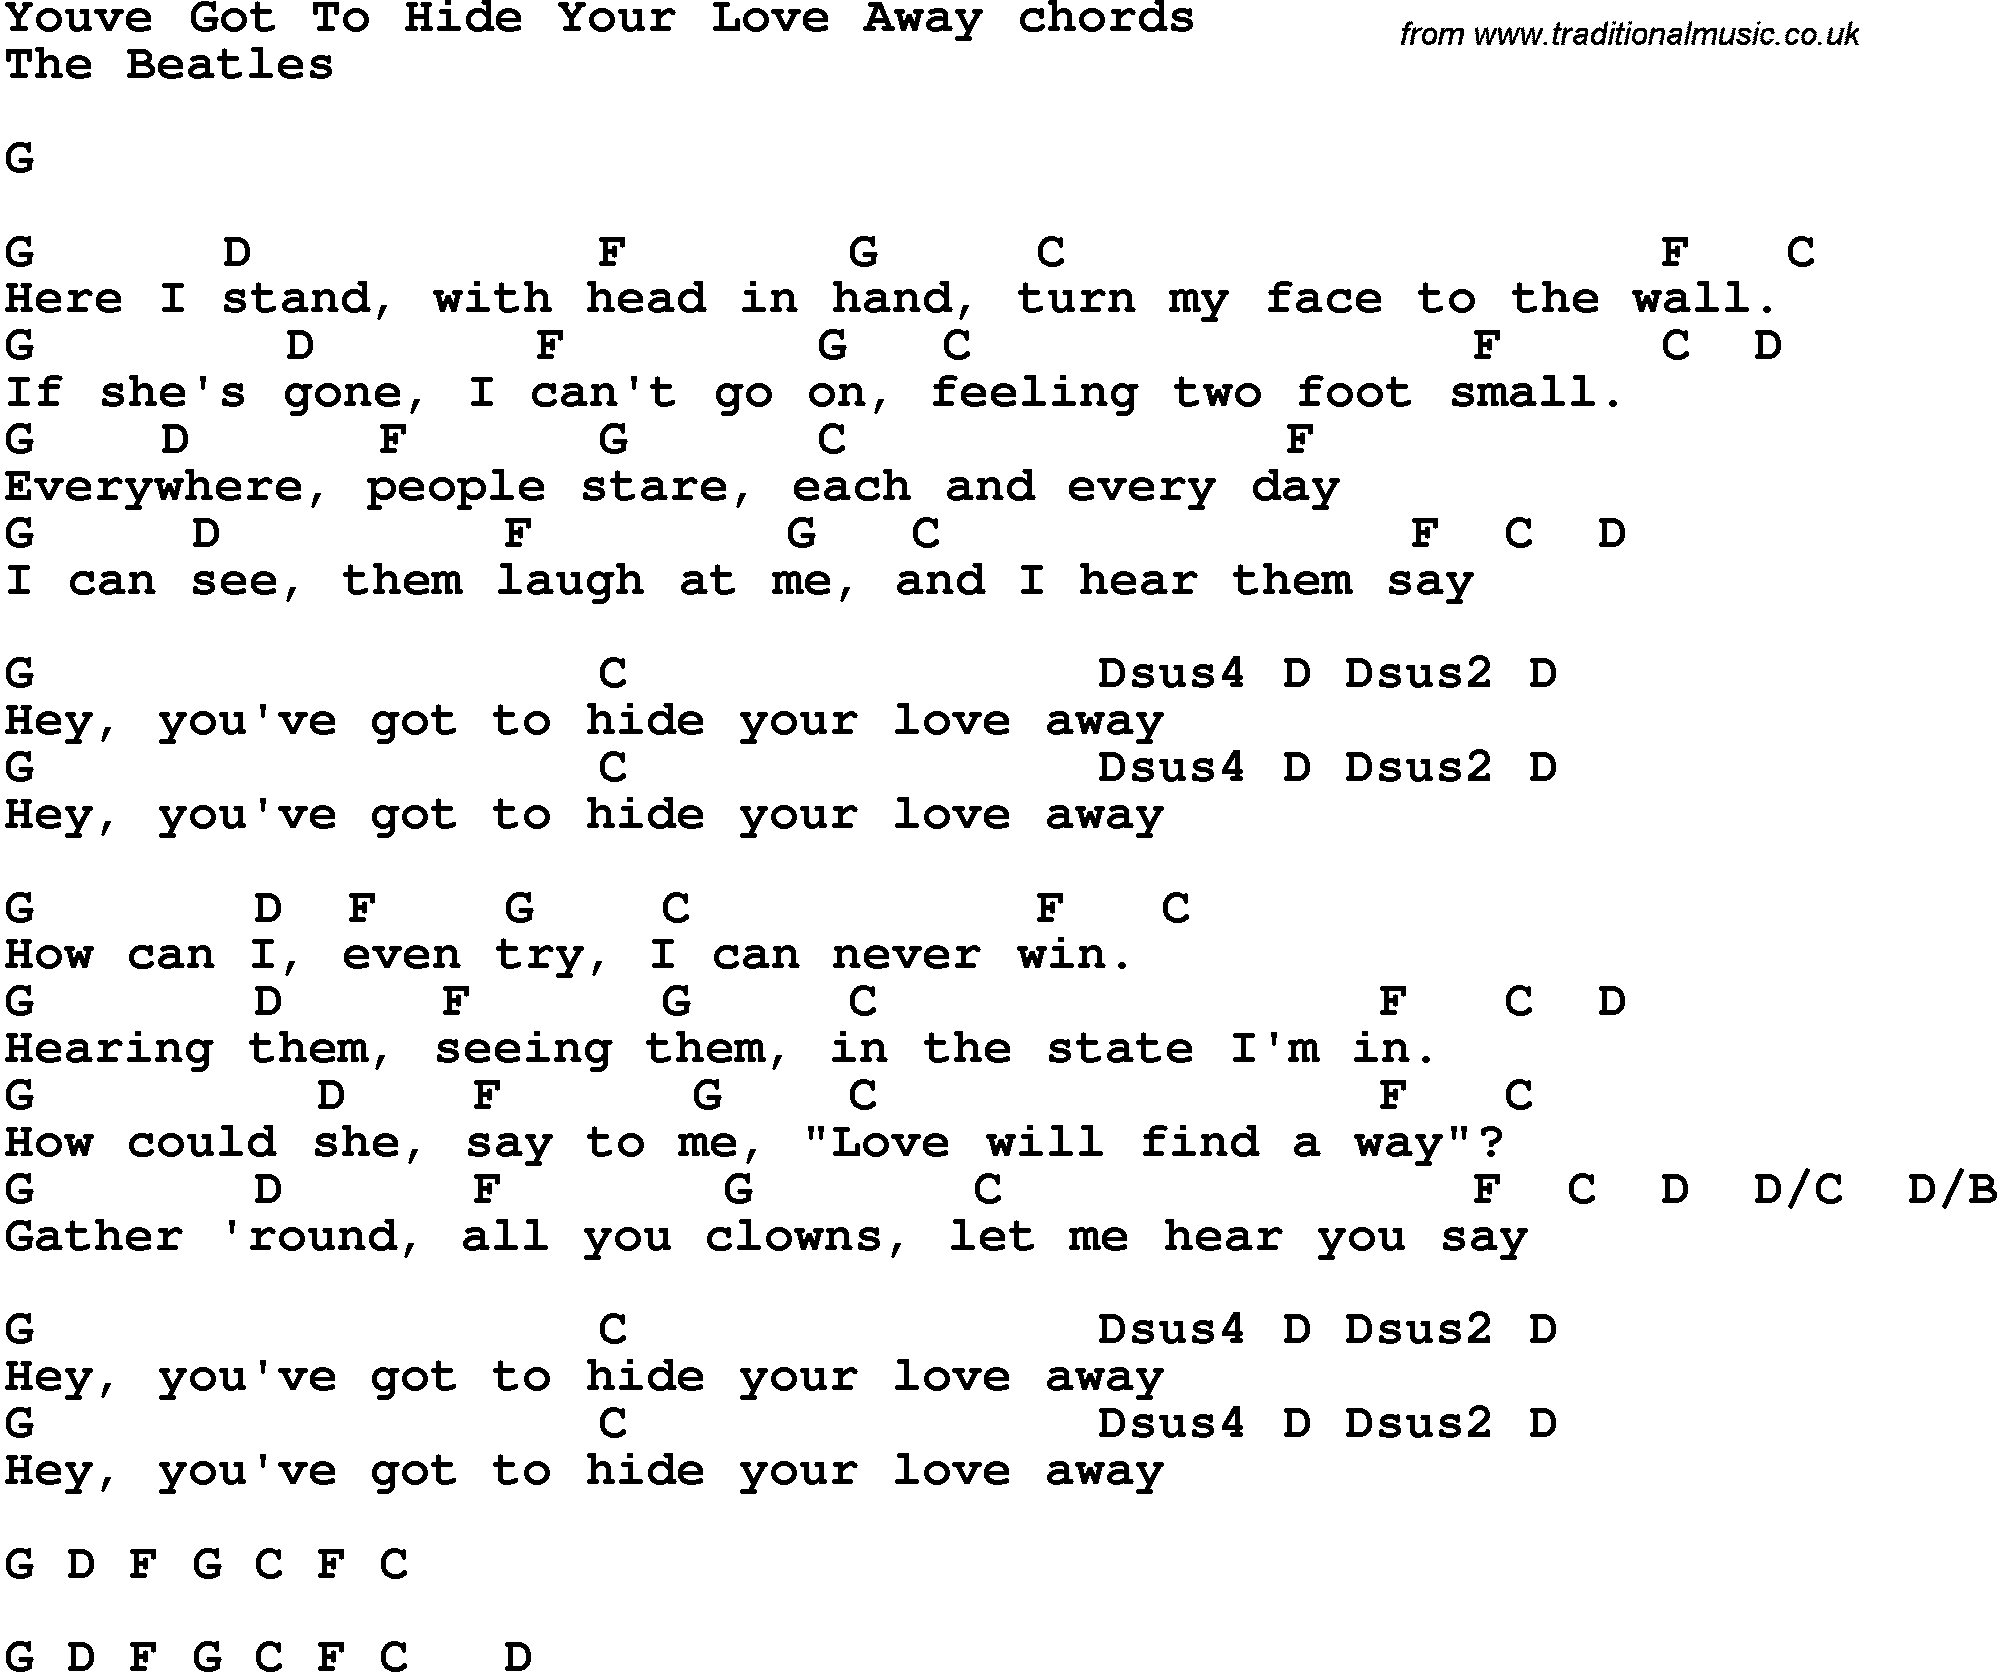 Song Lyrics with guitar chords for You've Got To Hide Your Love Away